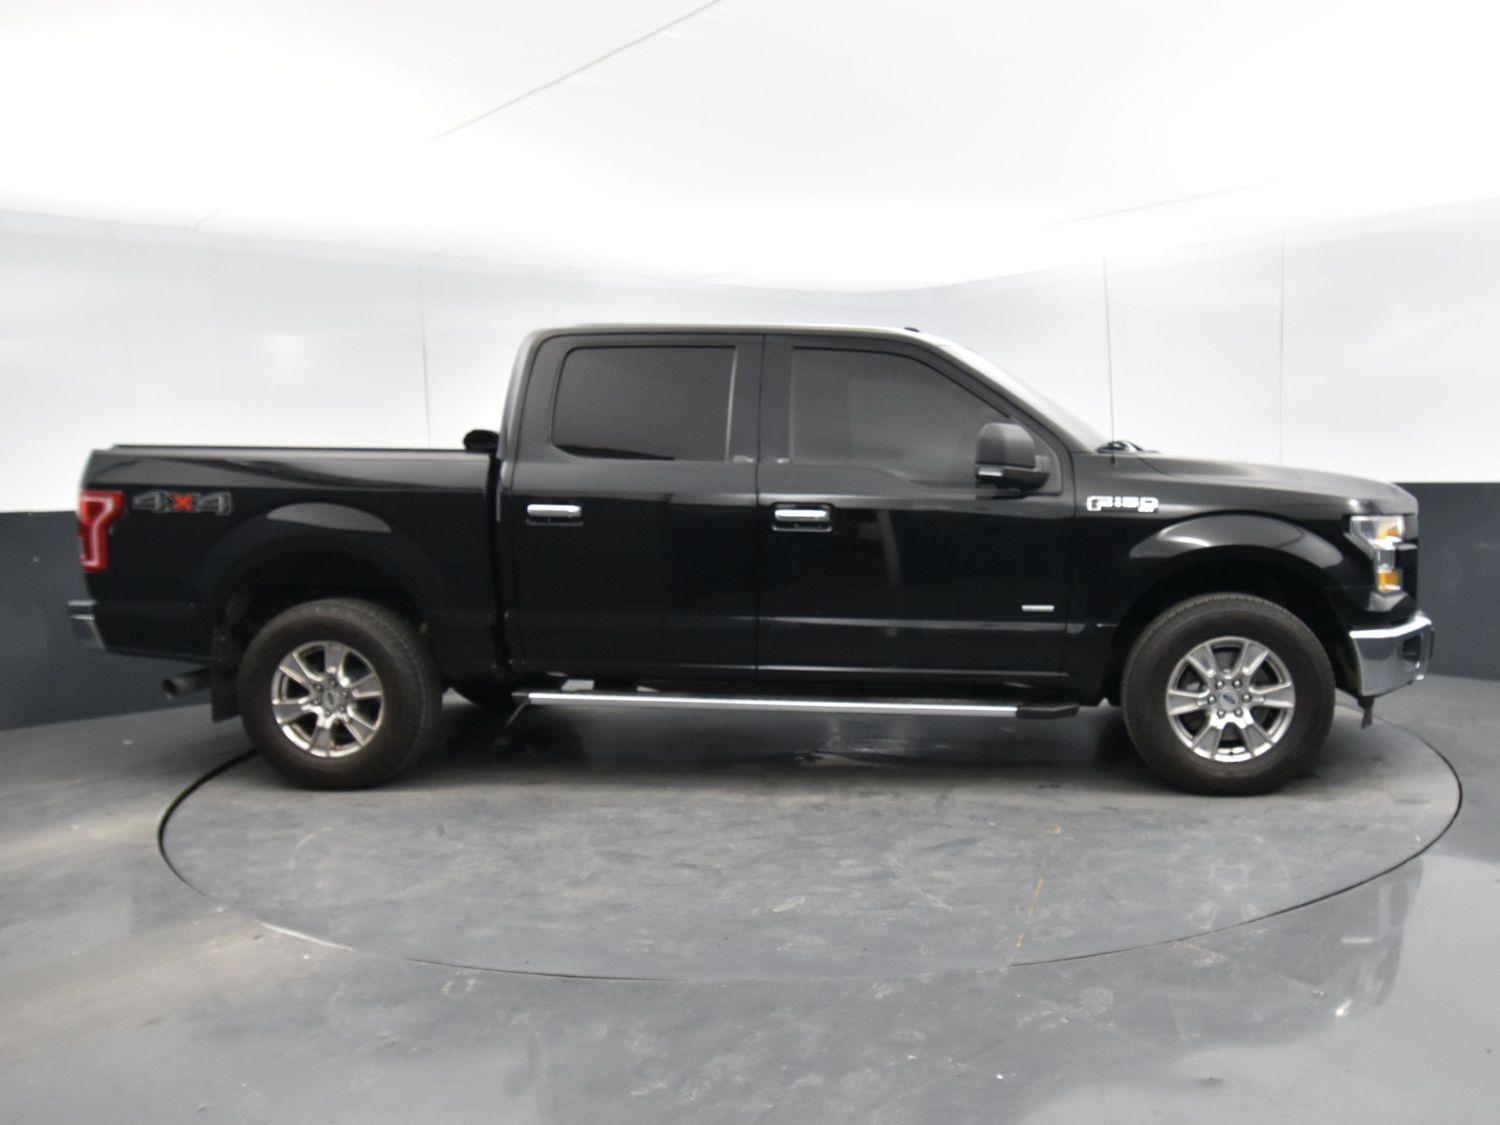 Used 2016 Ford F-150 XLT SuperCrew Cab Styleside for sale in Grand Island NE